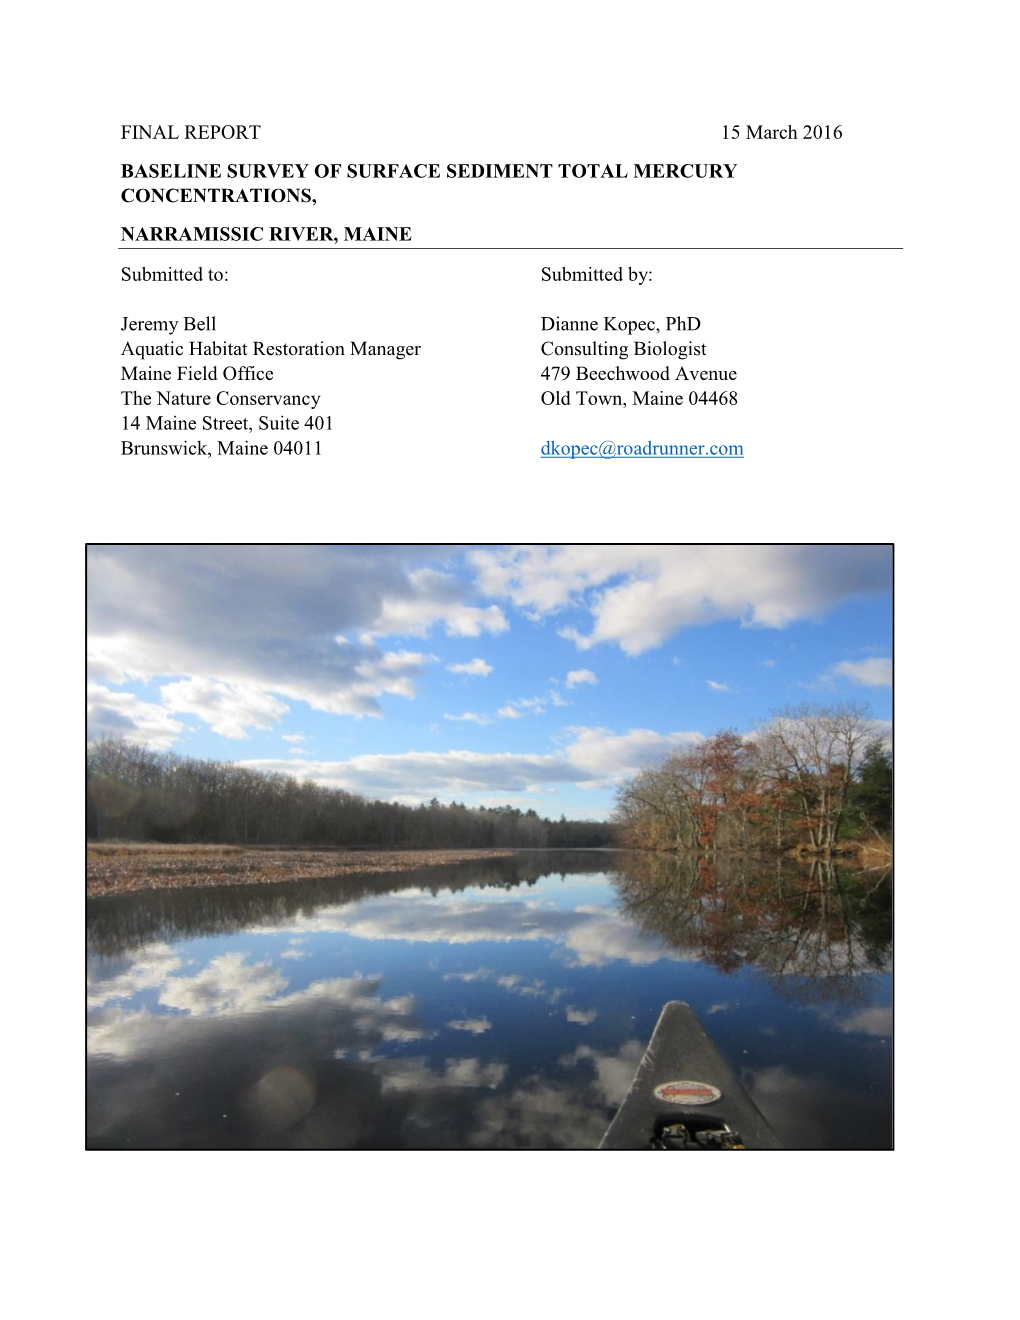 FINAL REPORT 15 March 2016 BASELINE SURVEY of SURFACE SEDIMENT TOTAL MERCURY CONCENTRATIONS, NARRAMISSIC RIVER, MAINE